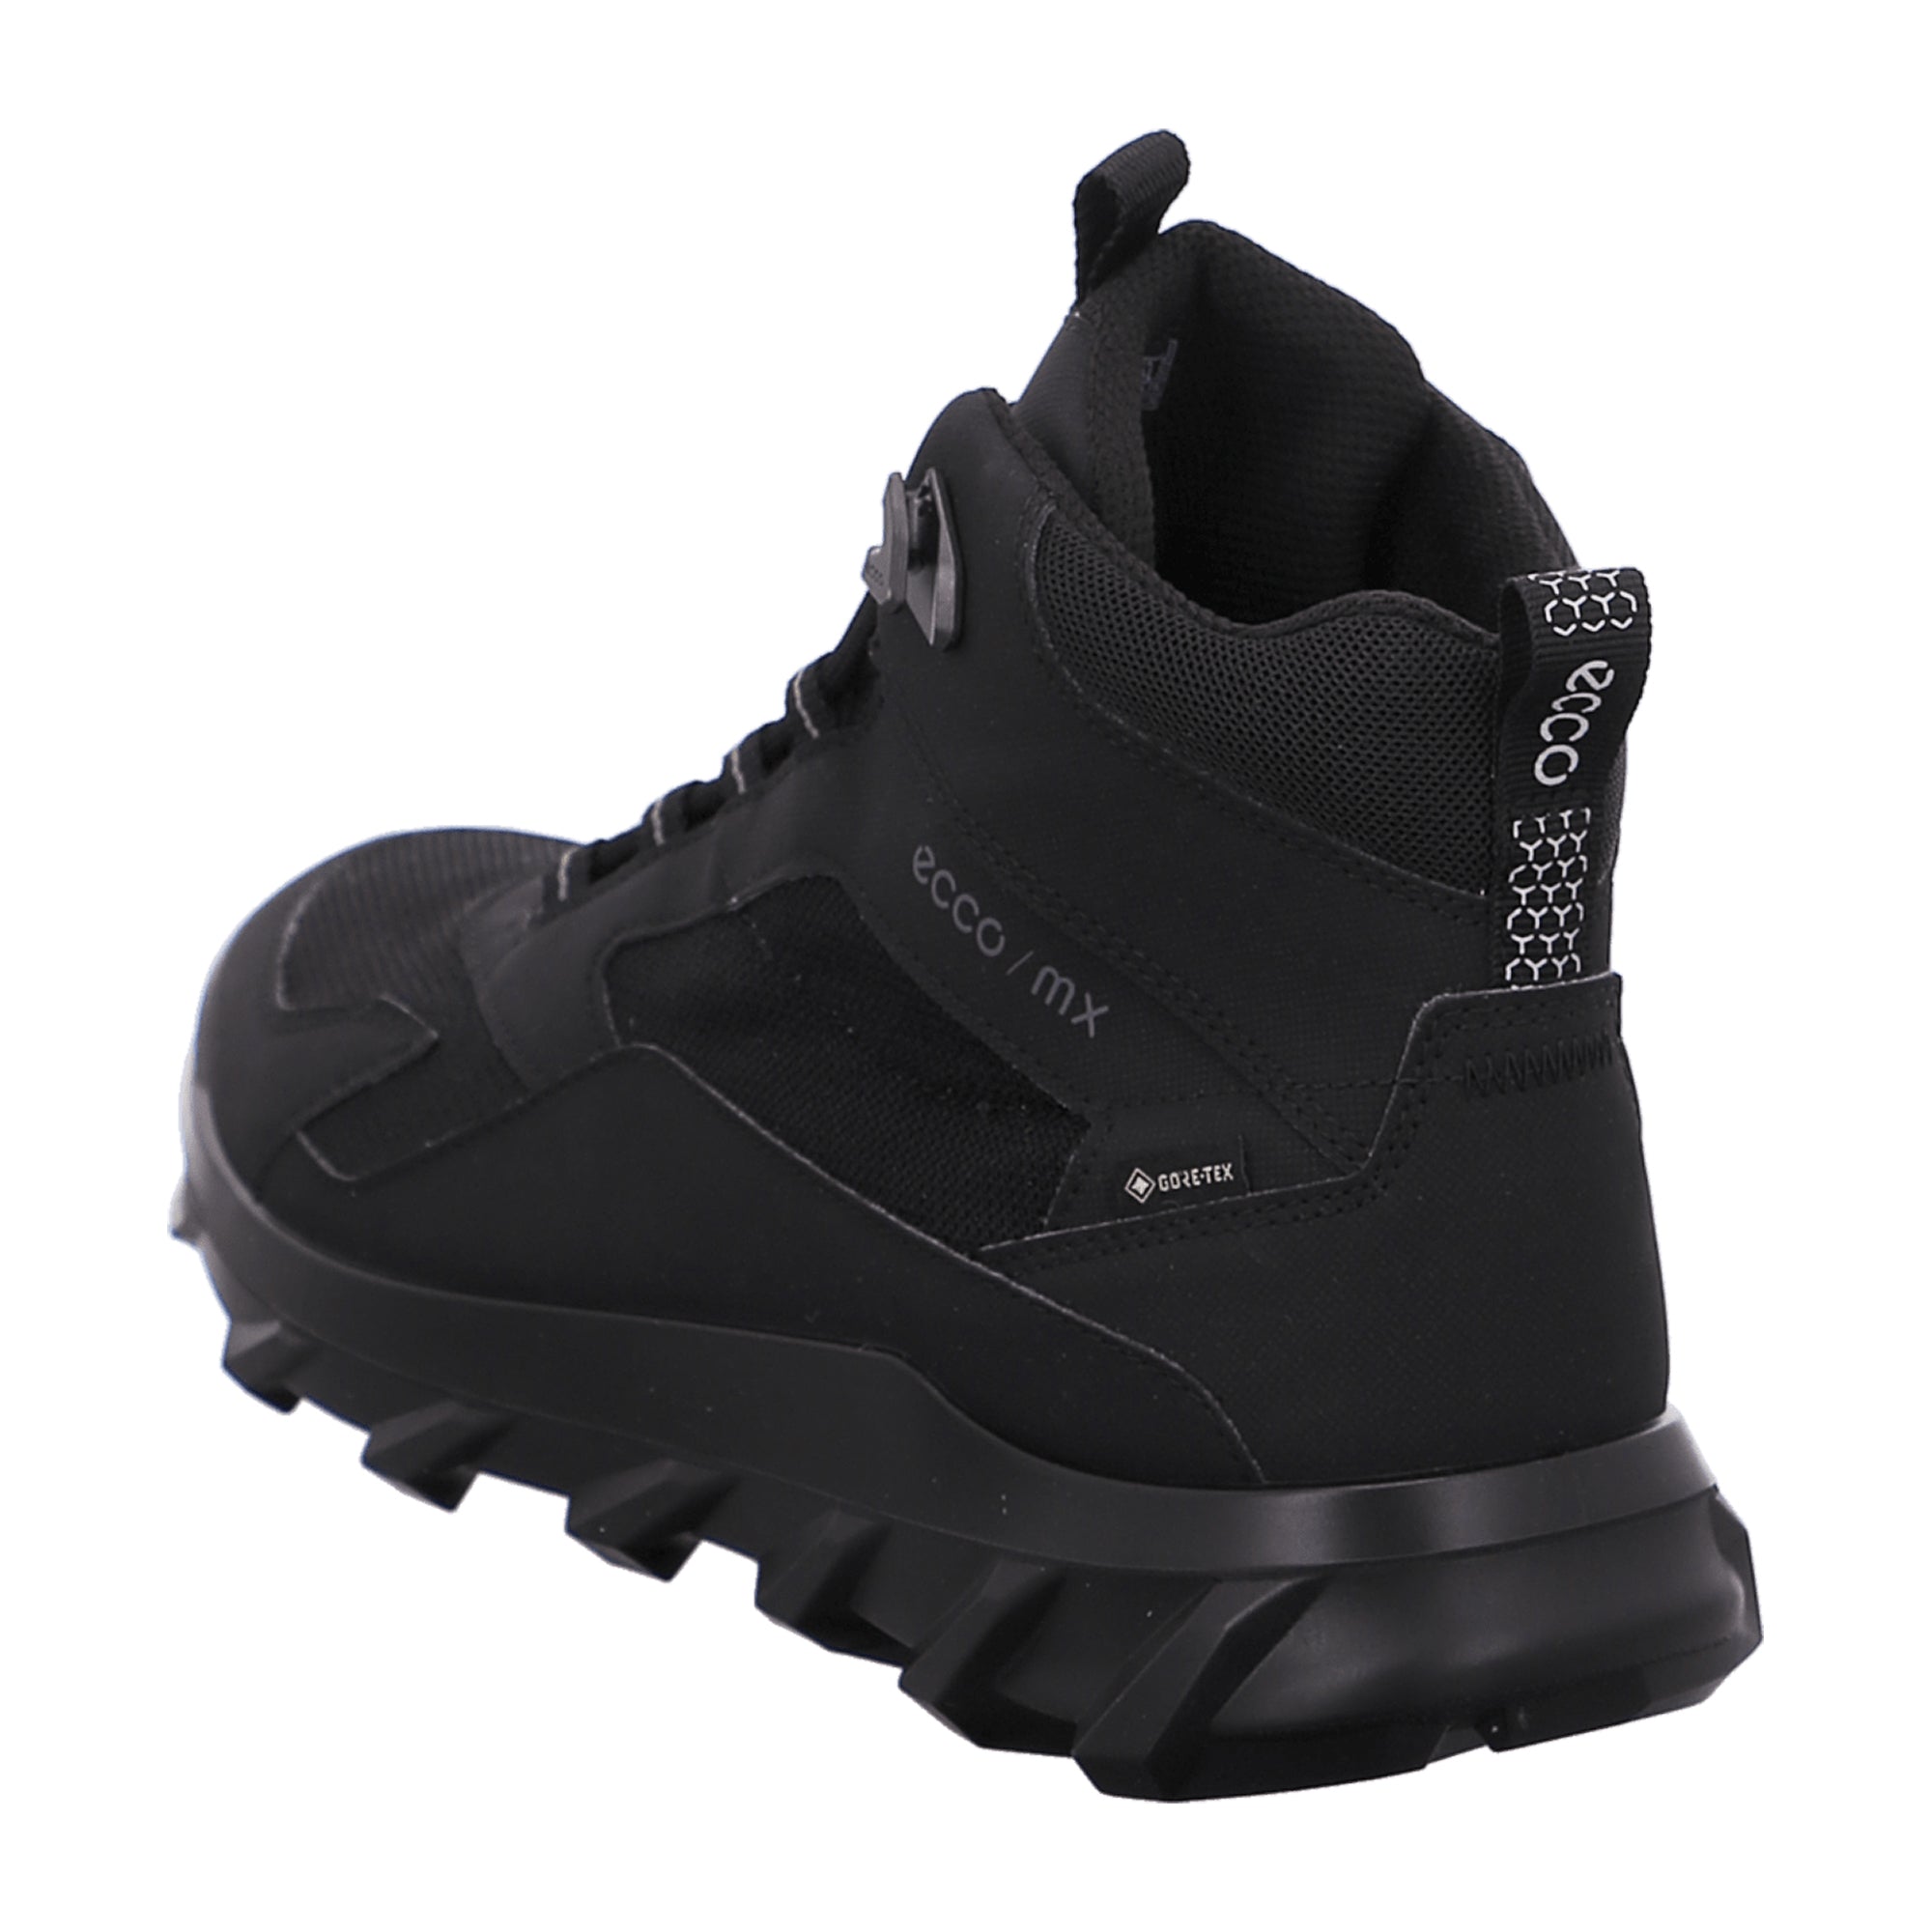 Ecco MX Men's Outdoor Shoes, Durable and Stylish - Black